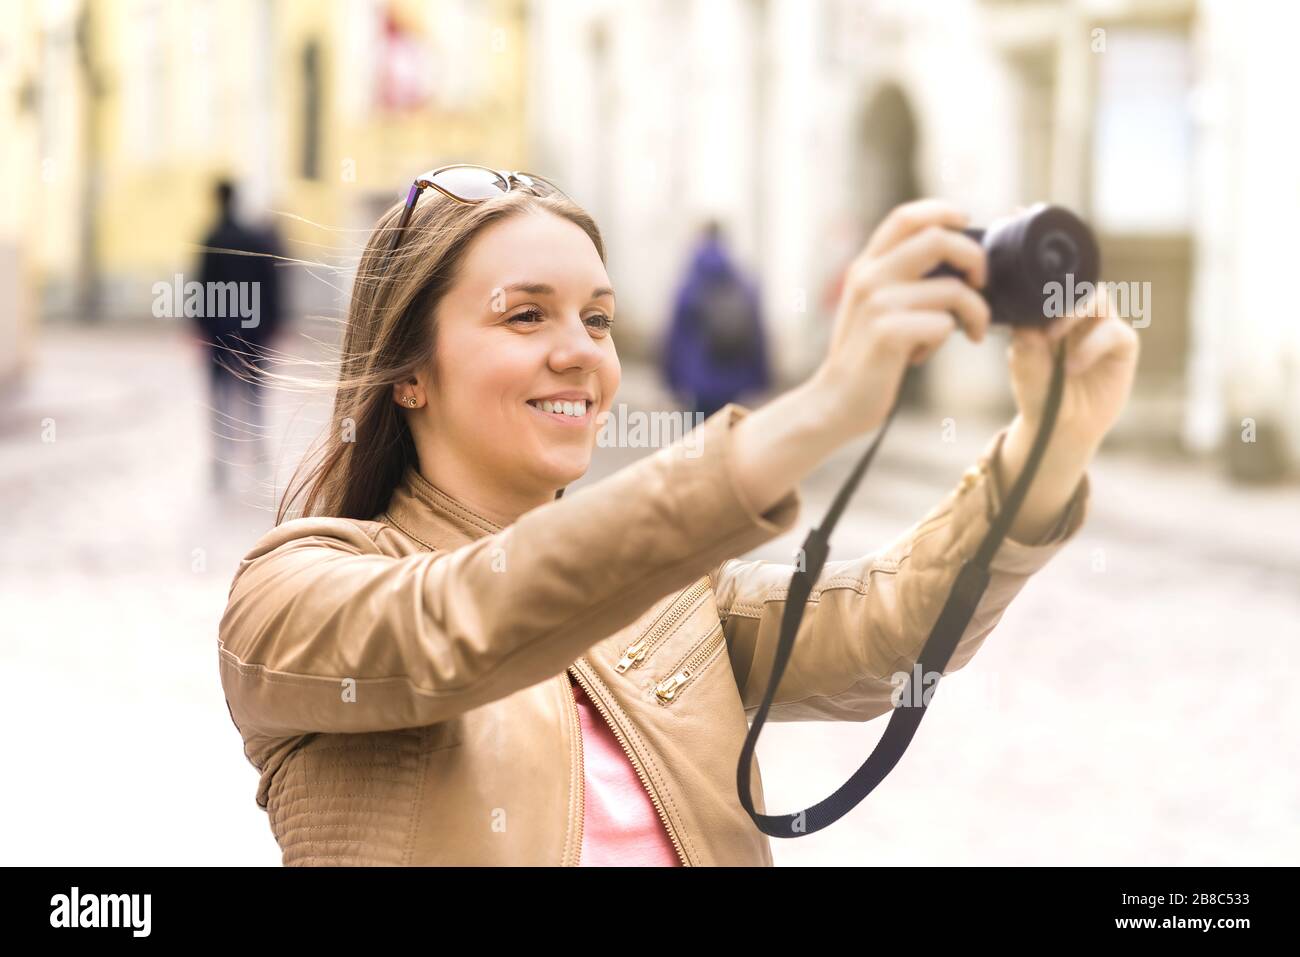 Woman taking pictures on vacation. Happy female traveler taking photos with digital camera. Tourists in old town in Europe. Stock Photo